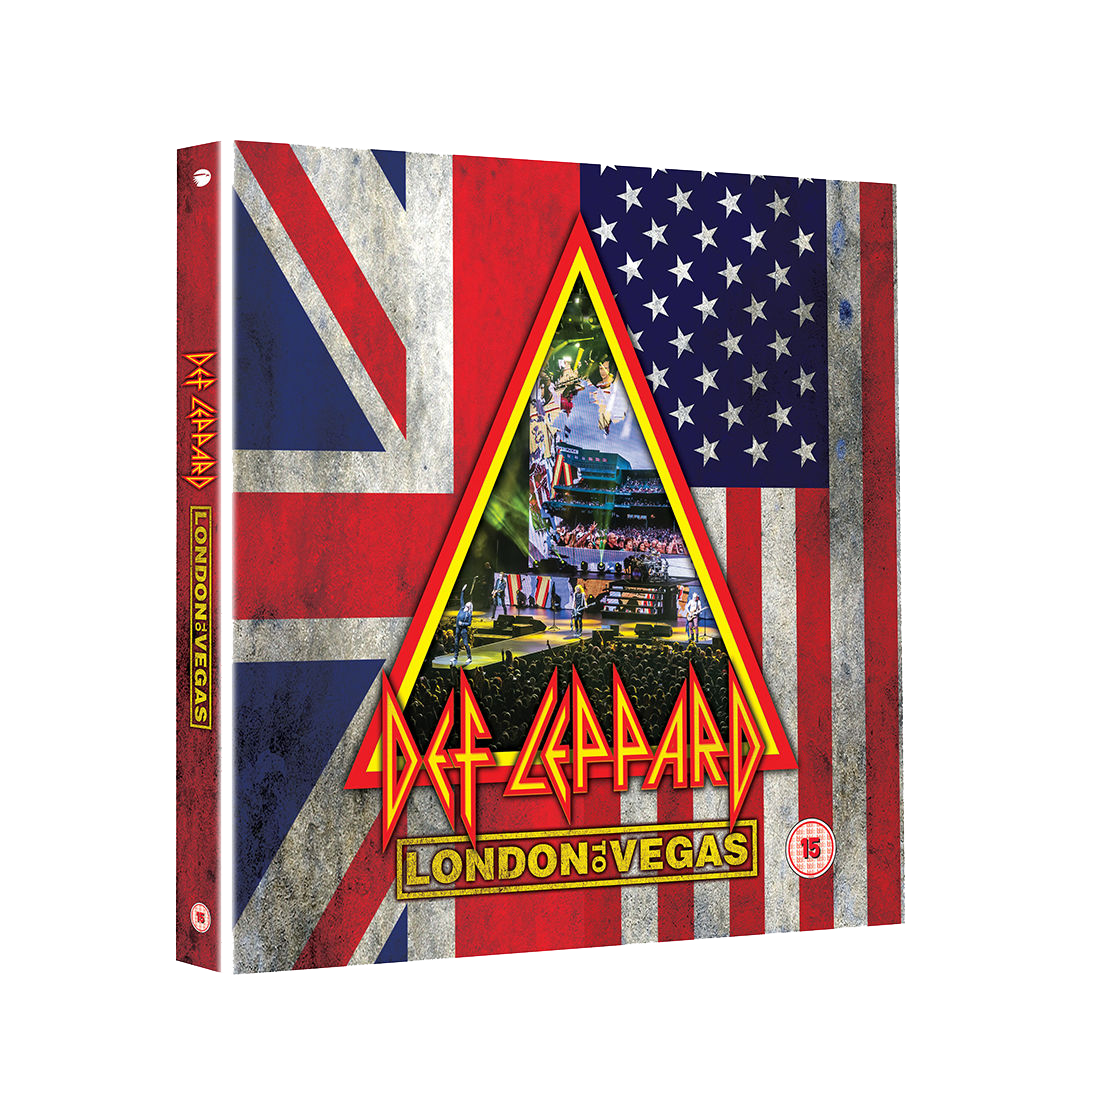 Def Leppard - London To Vegas: Deluxe 2 BLU-RAY + 4CD Box Set